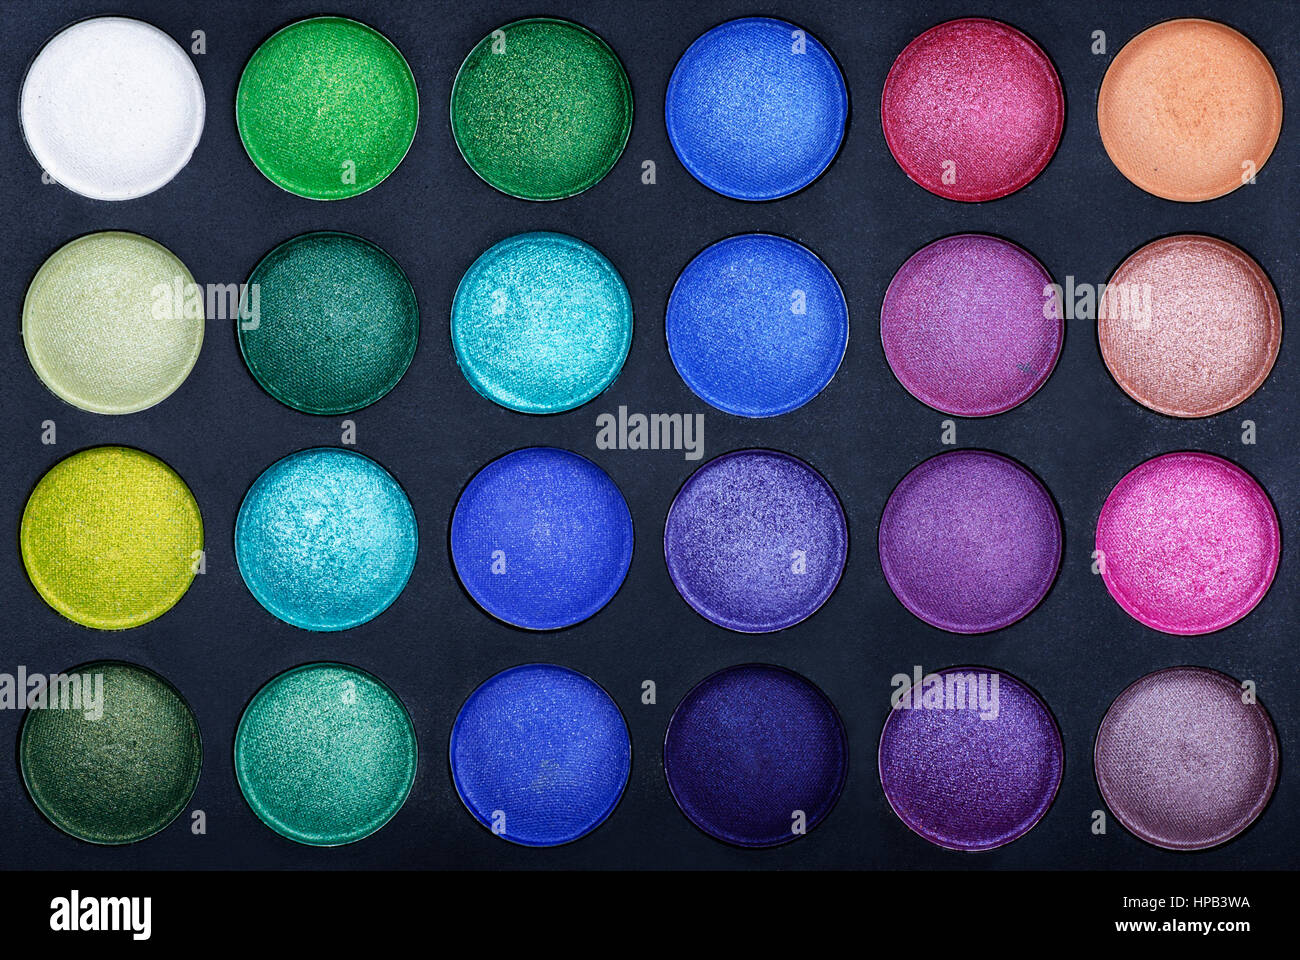 Make-up colorful eyeshadow palettes as background Stock Photo